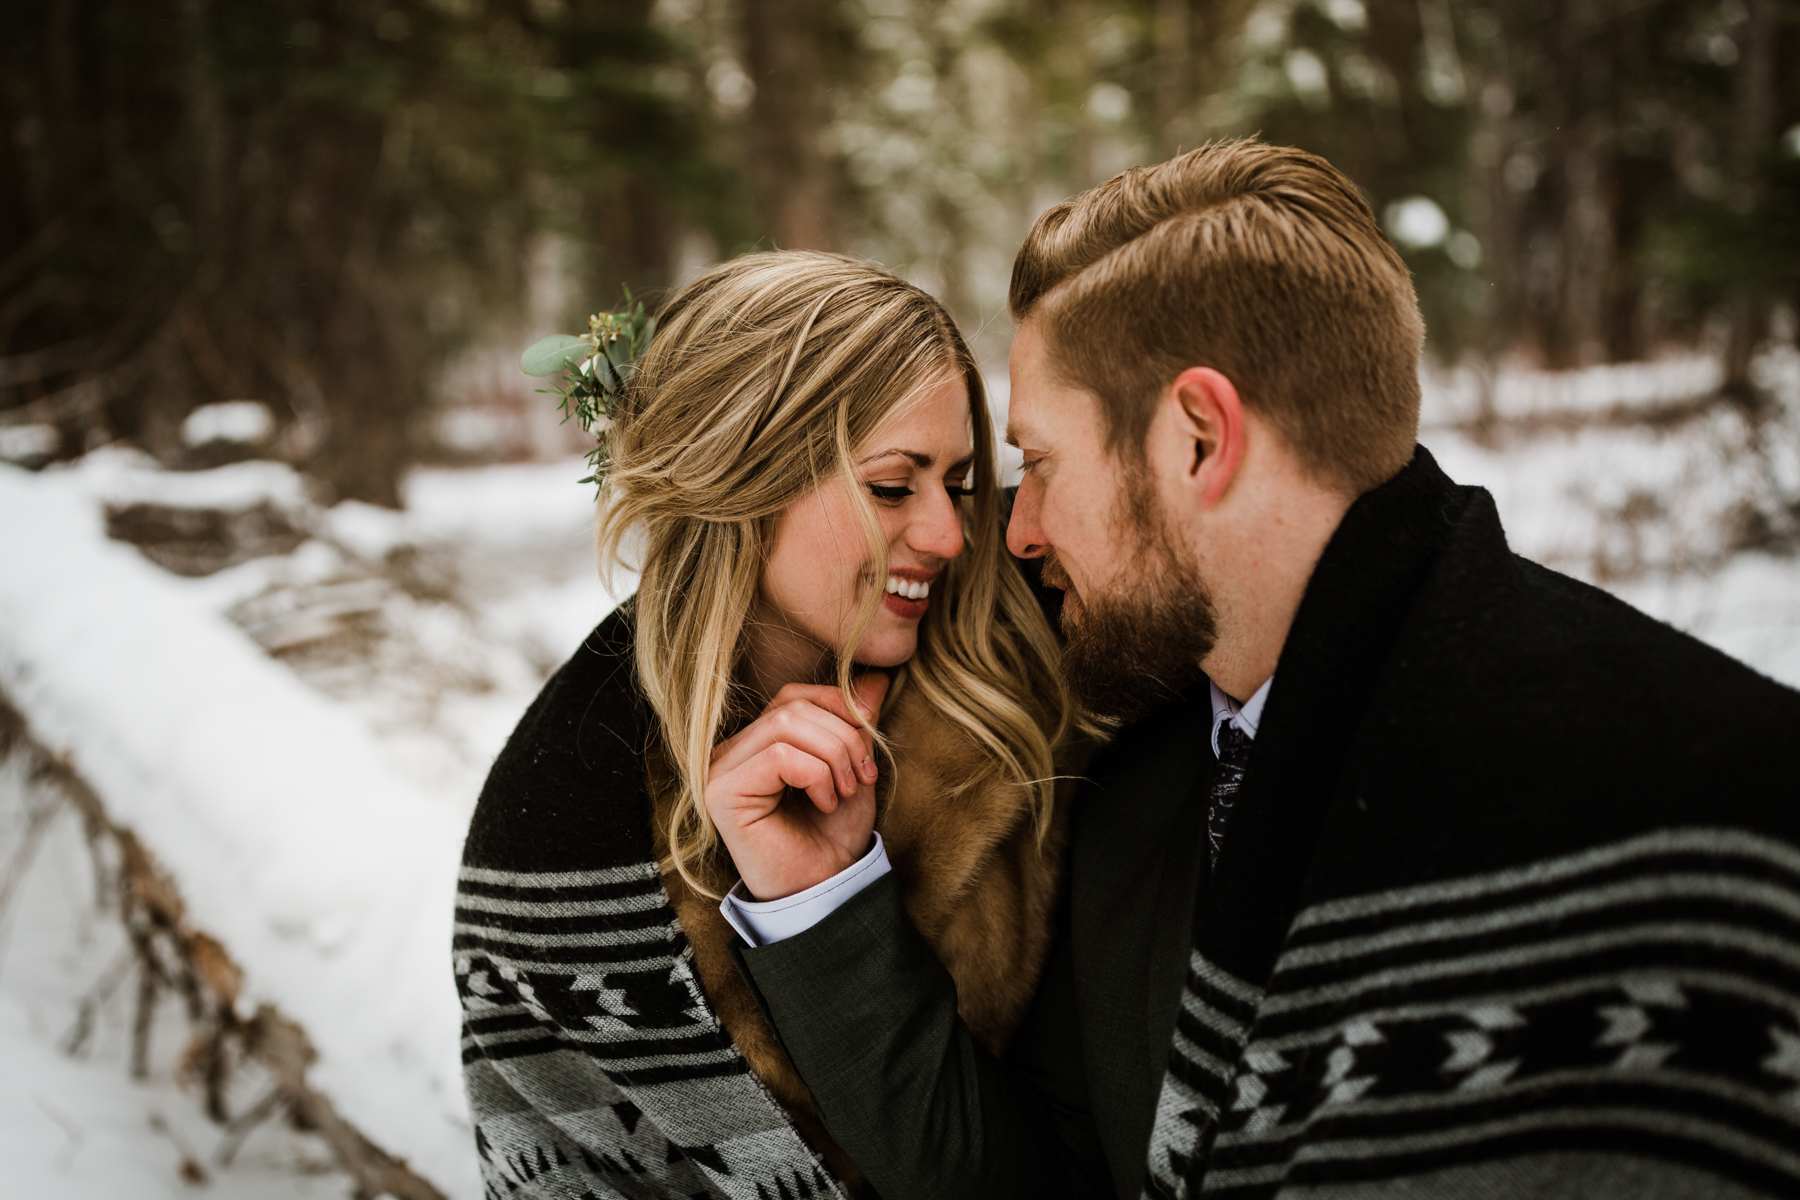 Canmore Elopement Photographer in the Canadian Rockies - Image 50